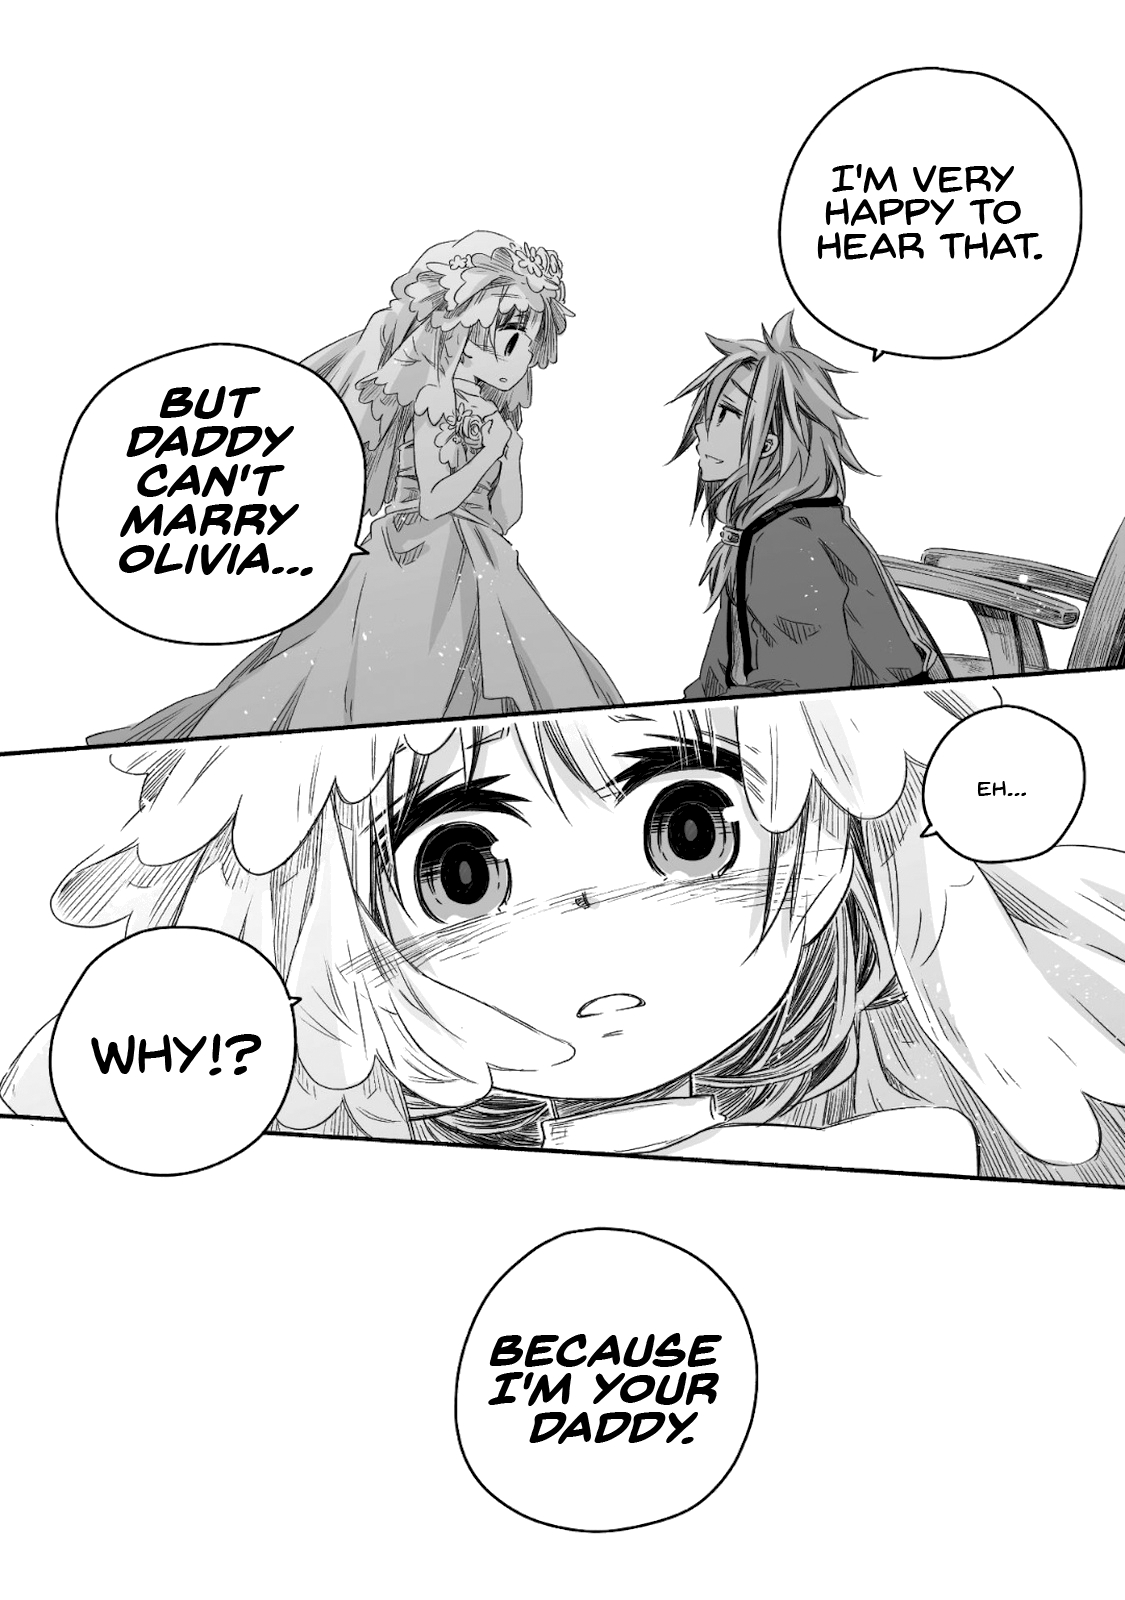 Parenting Diary Of The Strongest Dragon Who Suddenly Became A Dad ～ Cute Daughter, Heartwarming And Growing Up To Be The Strongest In The Human World ～ - 6 page 19